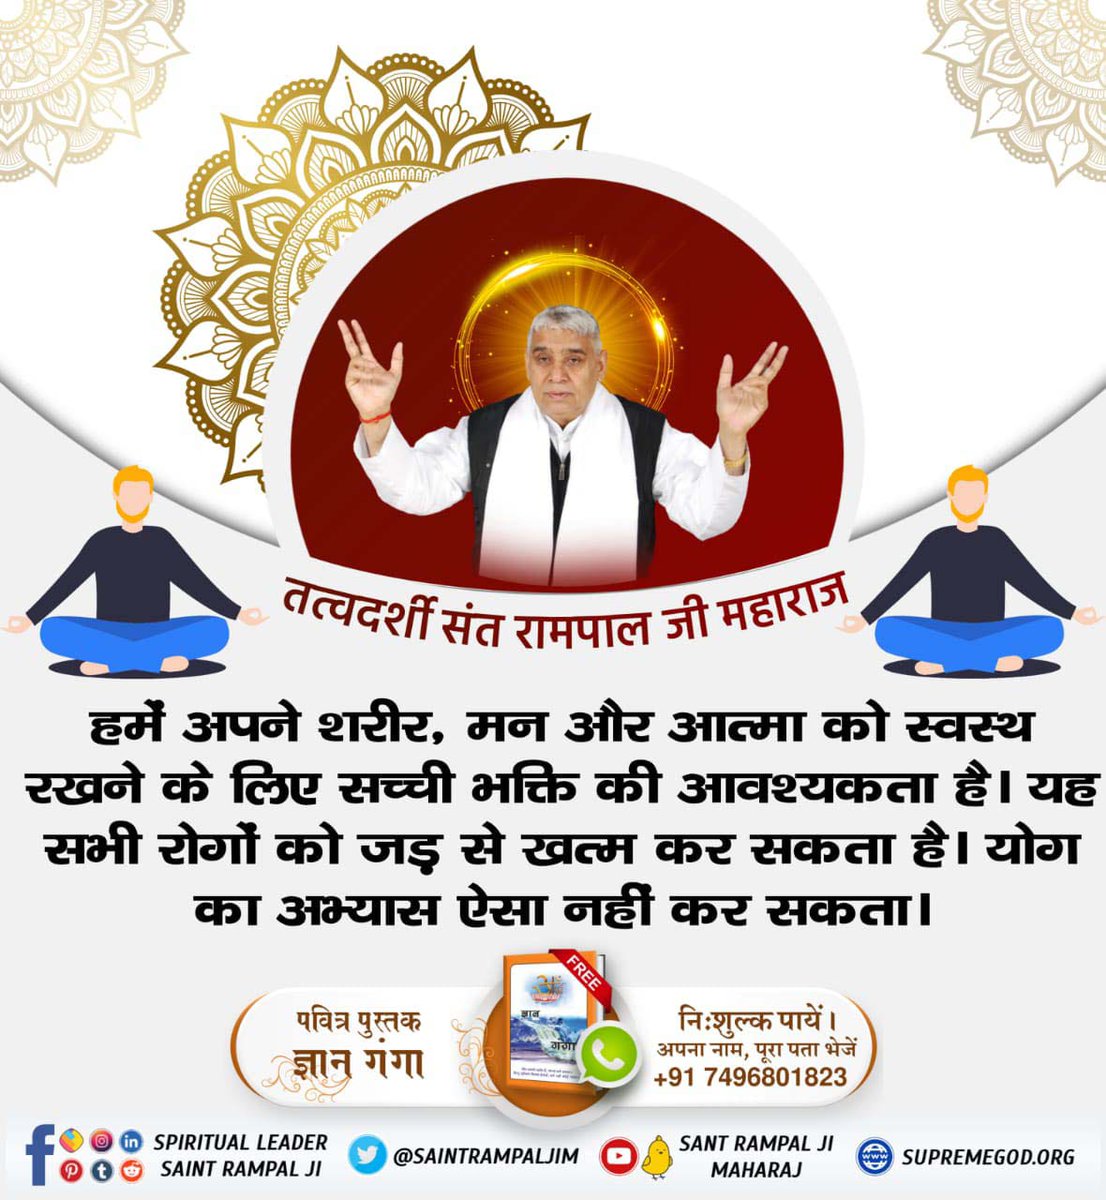 #What_Is_Meditation
People who meditate and meditate for attaining salvation is actually Hatha Yoga. By doing that, you do not attain God. The attainment of God and salvation is achieved by doing true devotions (Sat - Bhakti). ✨📿 
Sant Rampal Ji Maharaj